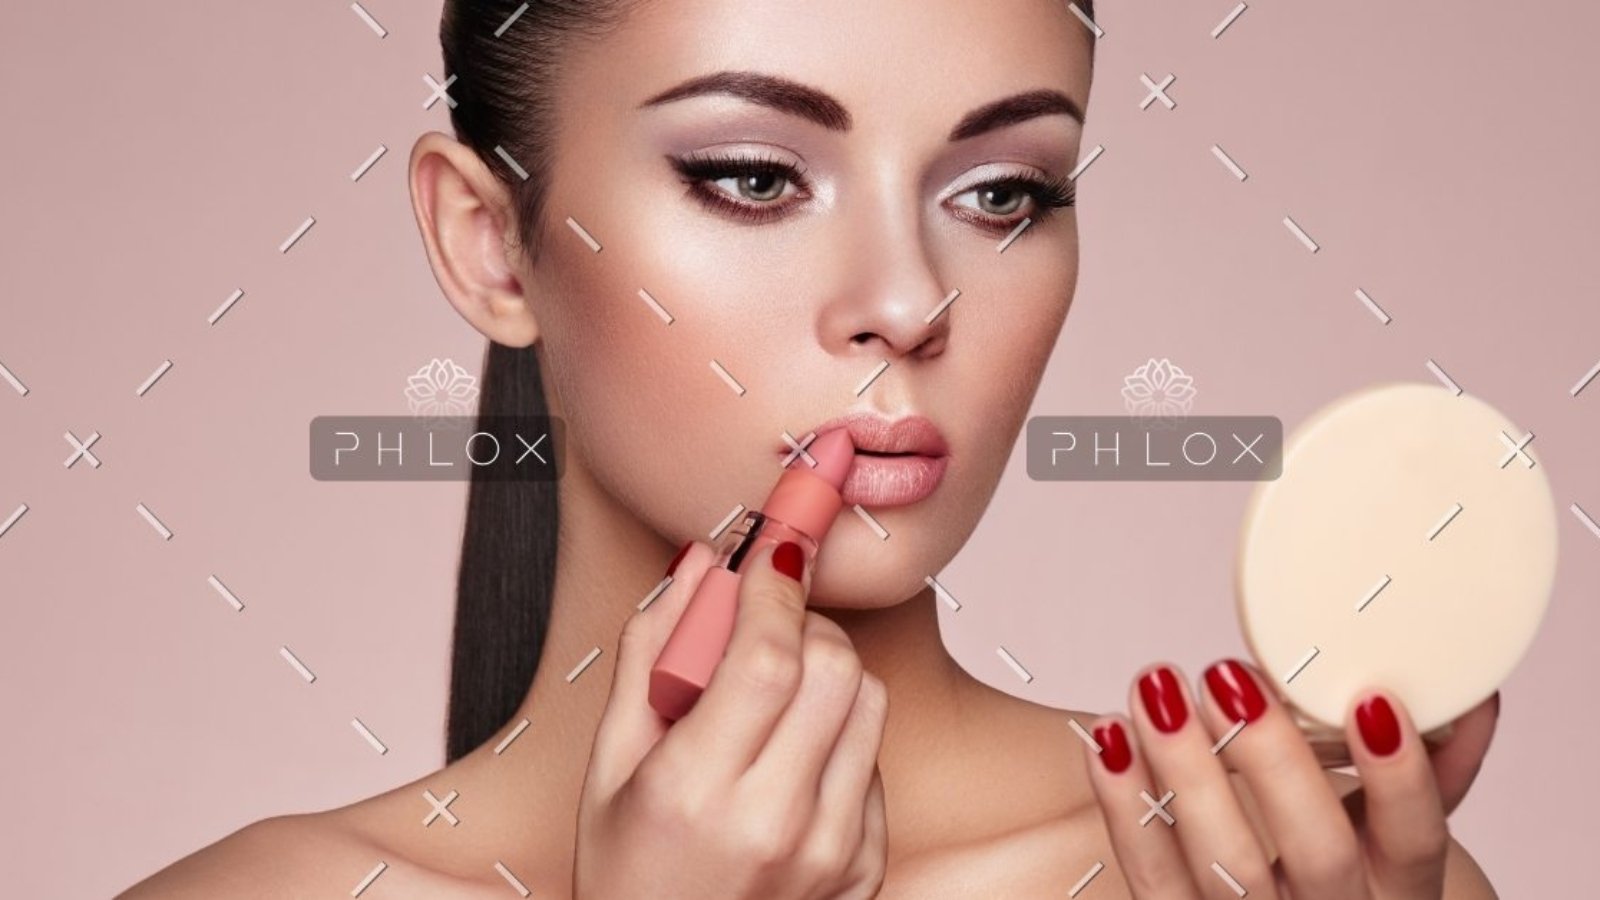 demo-attachment-551-beautiful-woman-paints-lips-with-lipstick-PMB6YWP-1